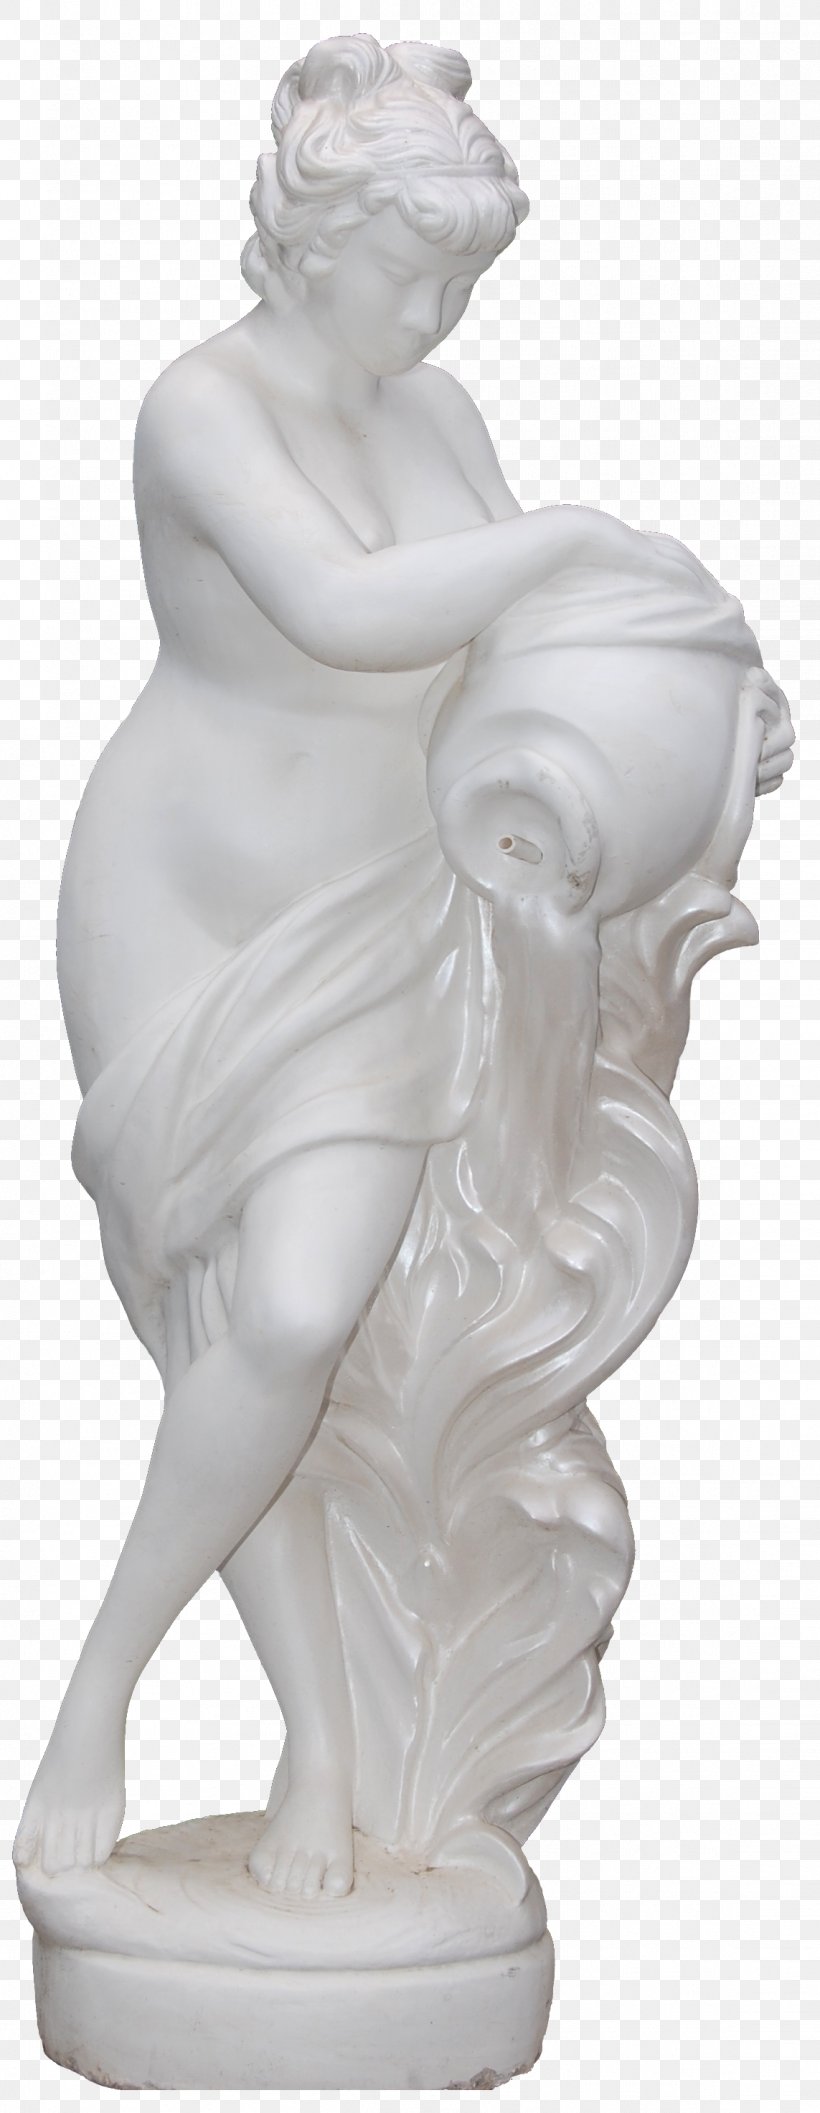 Statue Of Liberty Classical Sculpture Stone Carving, PNG, 1143x2946px, Statue Of Liberty, Architecture, Artifact, Artwork, Carving Download Free